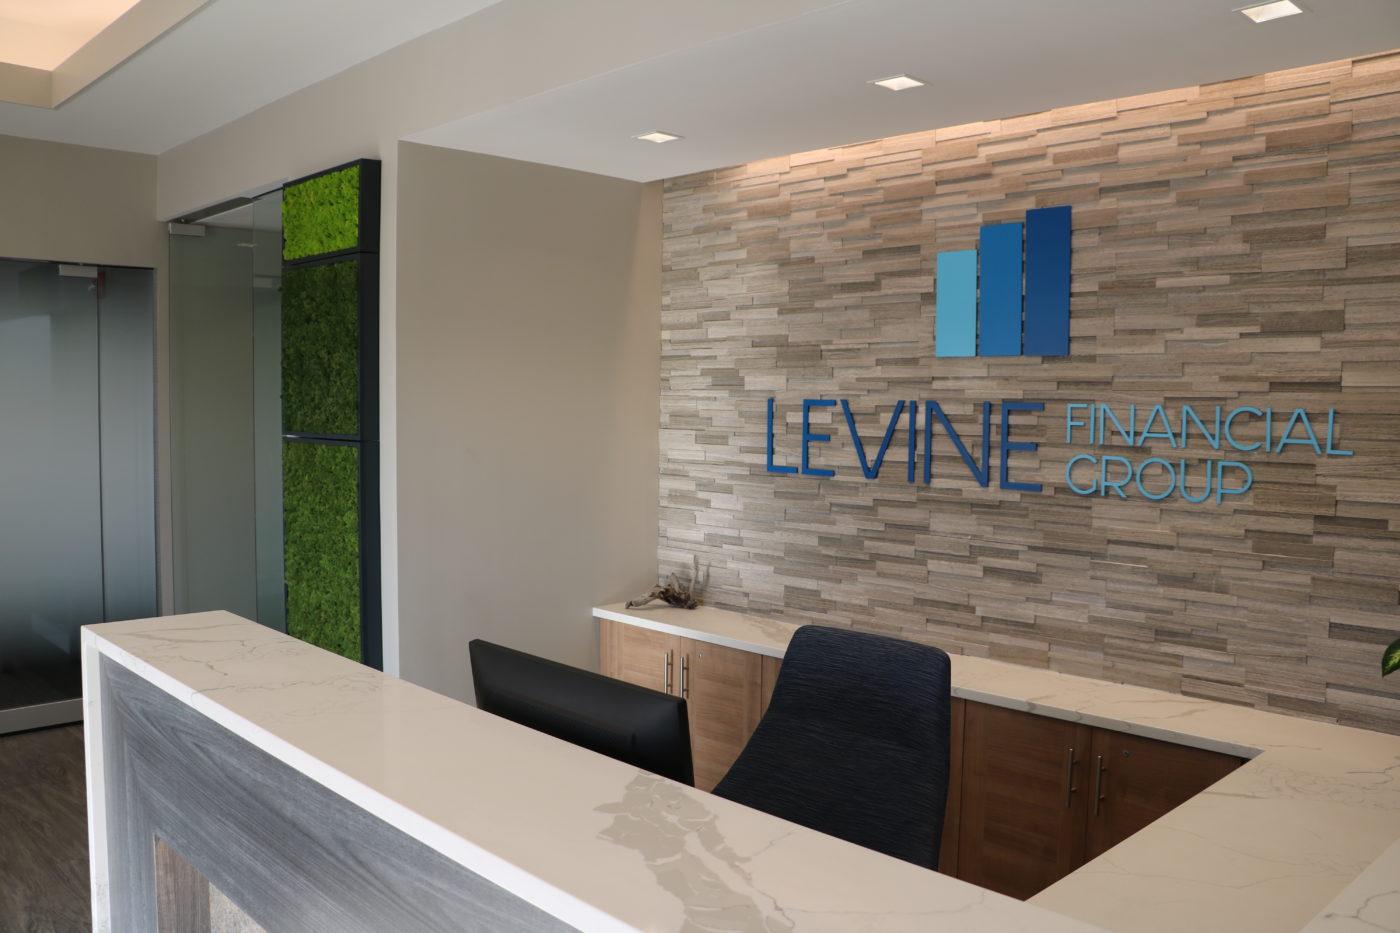 Levine Financial Group